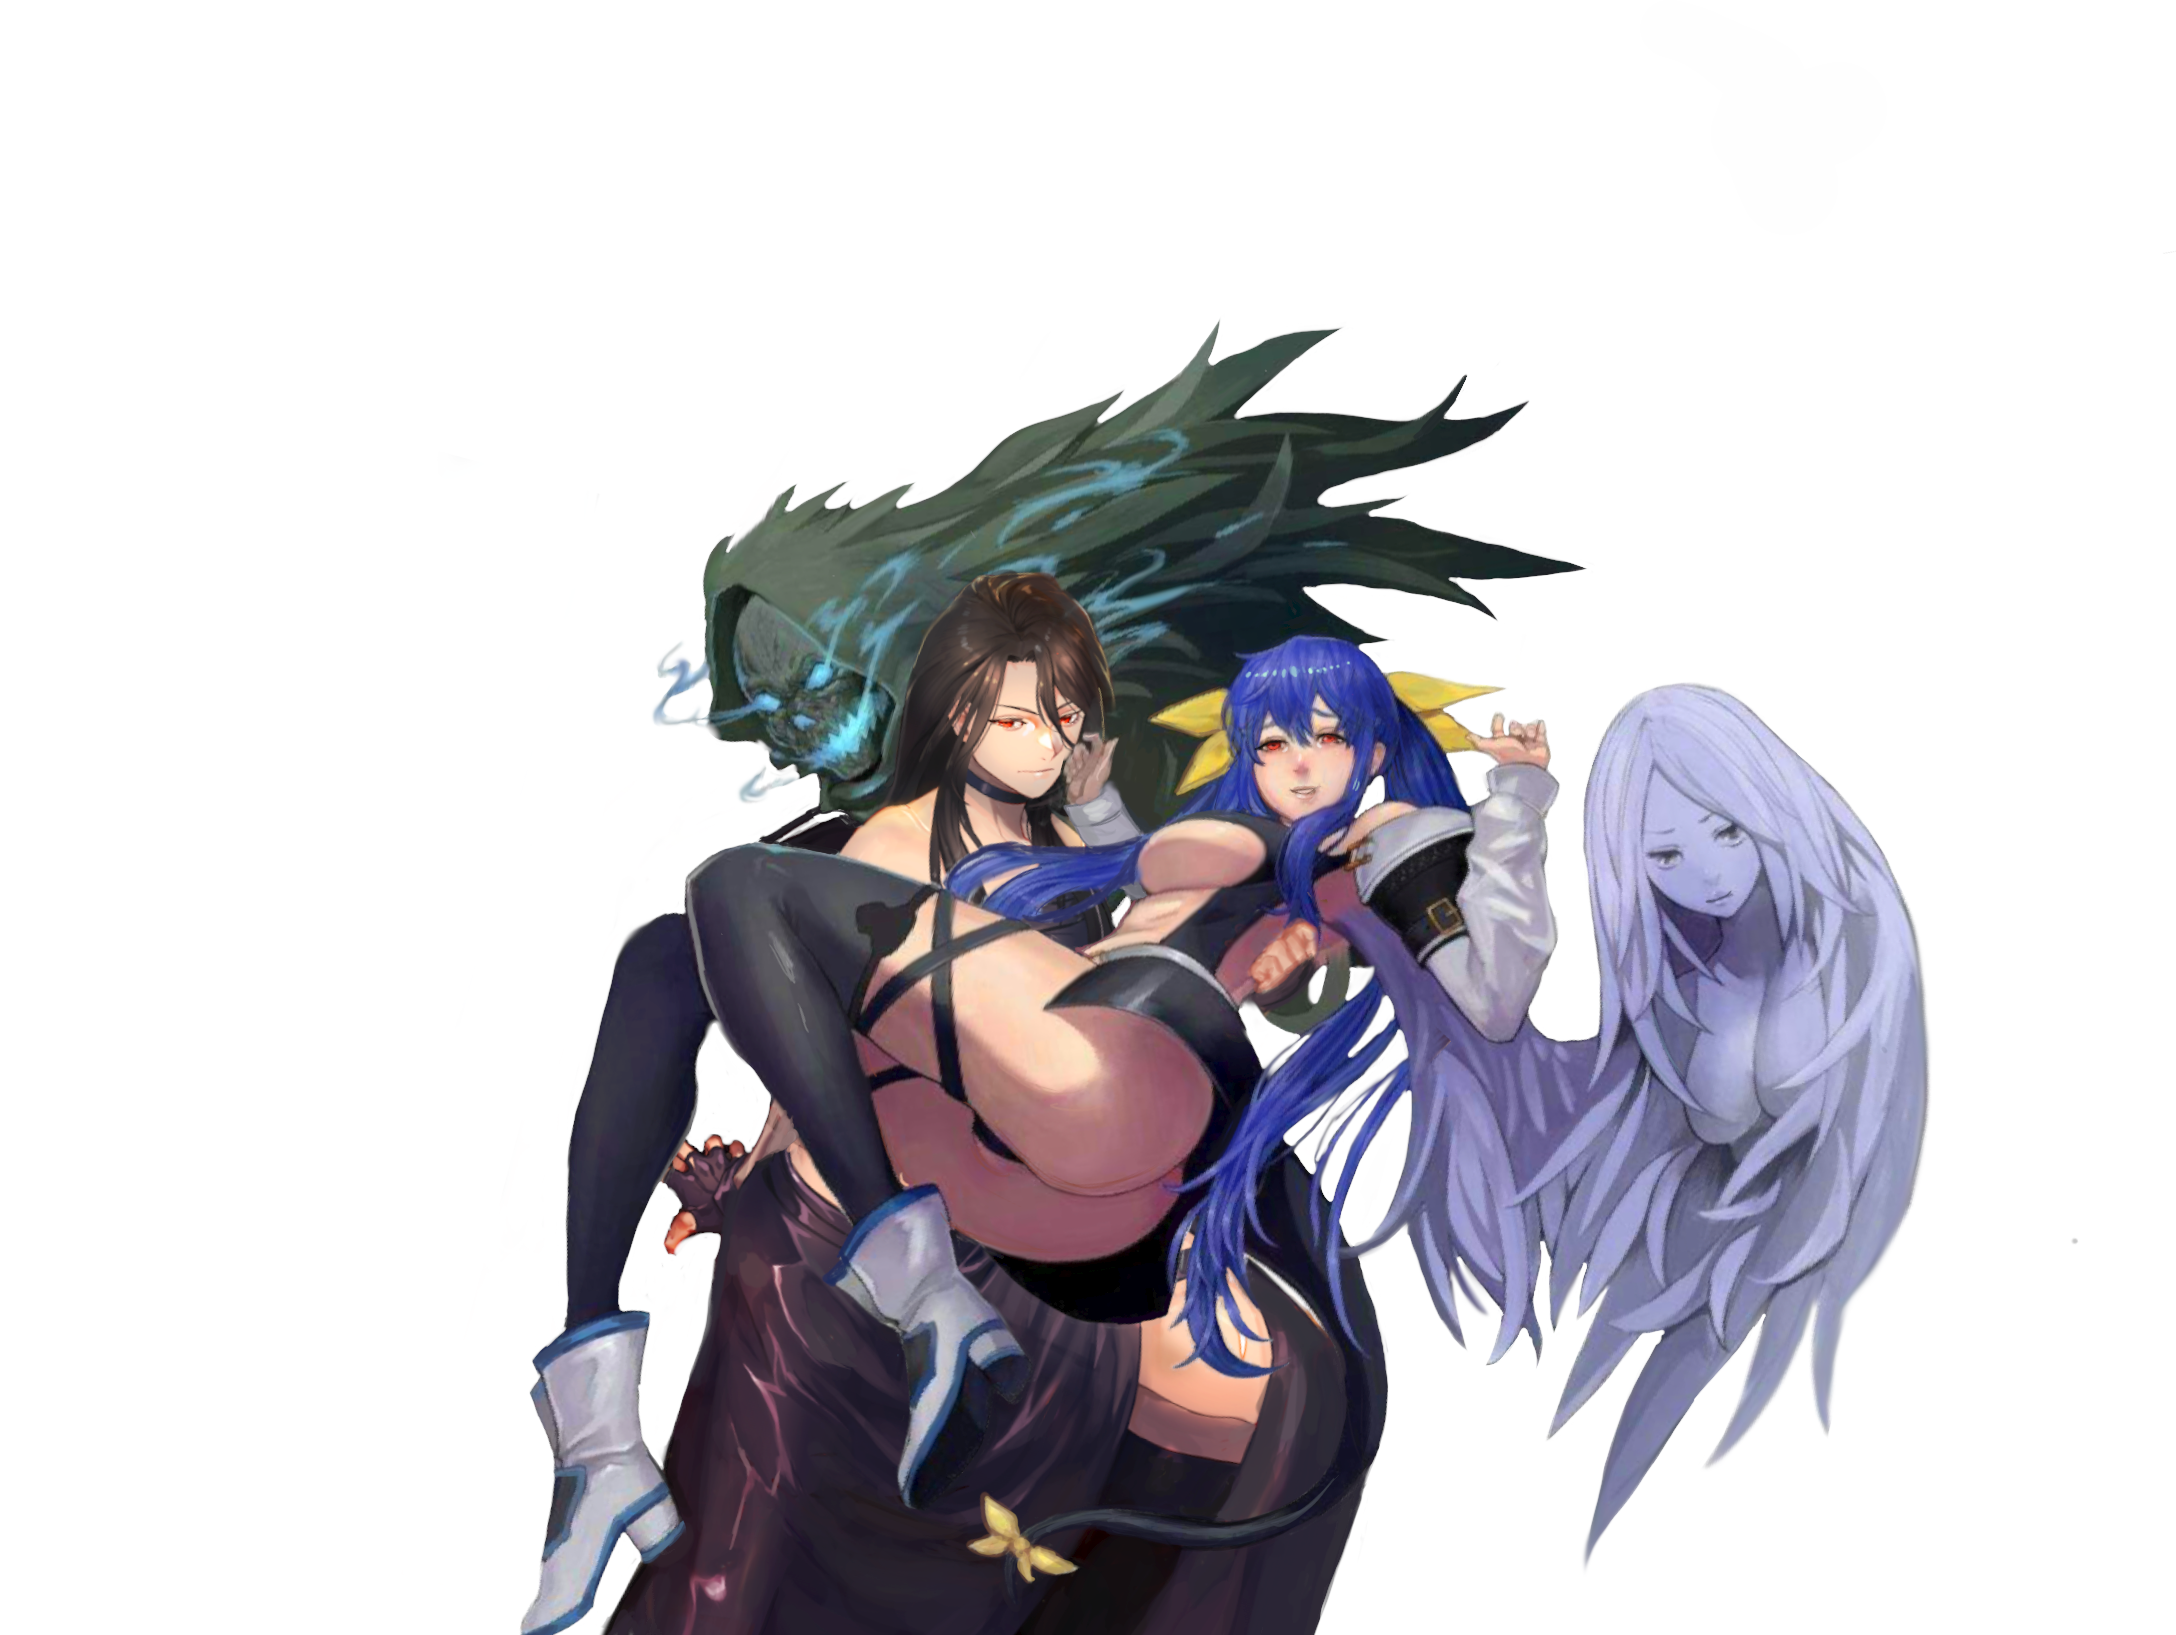 Anime 2176x1635 Guilty Gear Dizzy (Guilty Gear) anime games anime girl with wings anime couple Testament (guilty gear) Fighting Games Guilty Gear XX